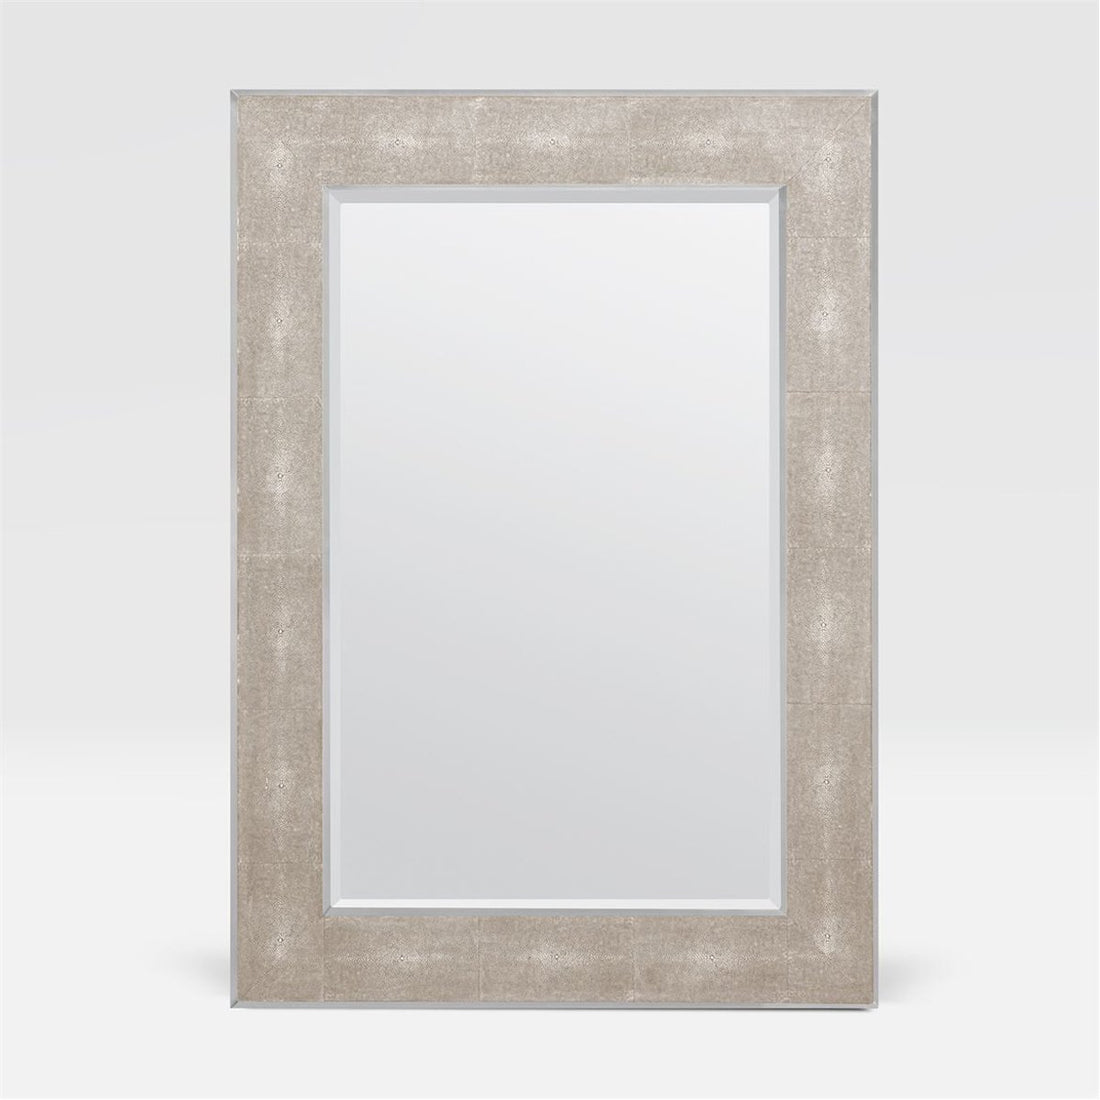 Made Goods Merrick Realistic Faux Shagreen Mirror with Trim Detail